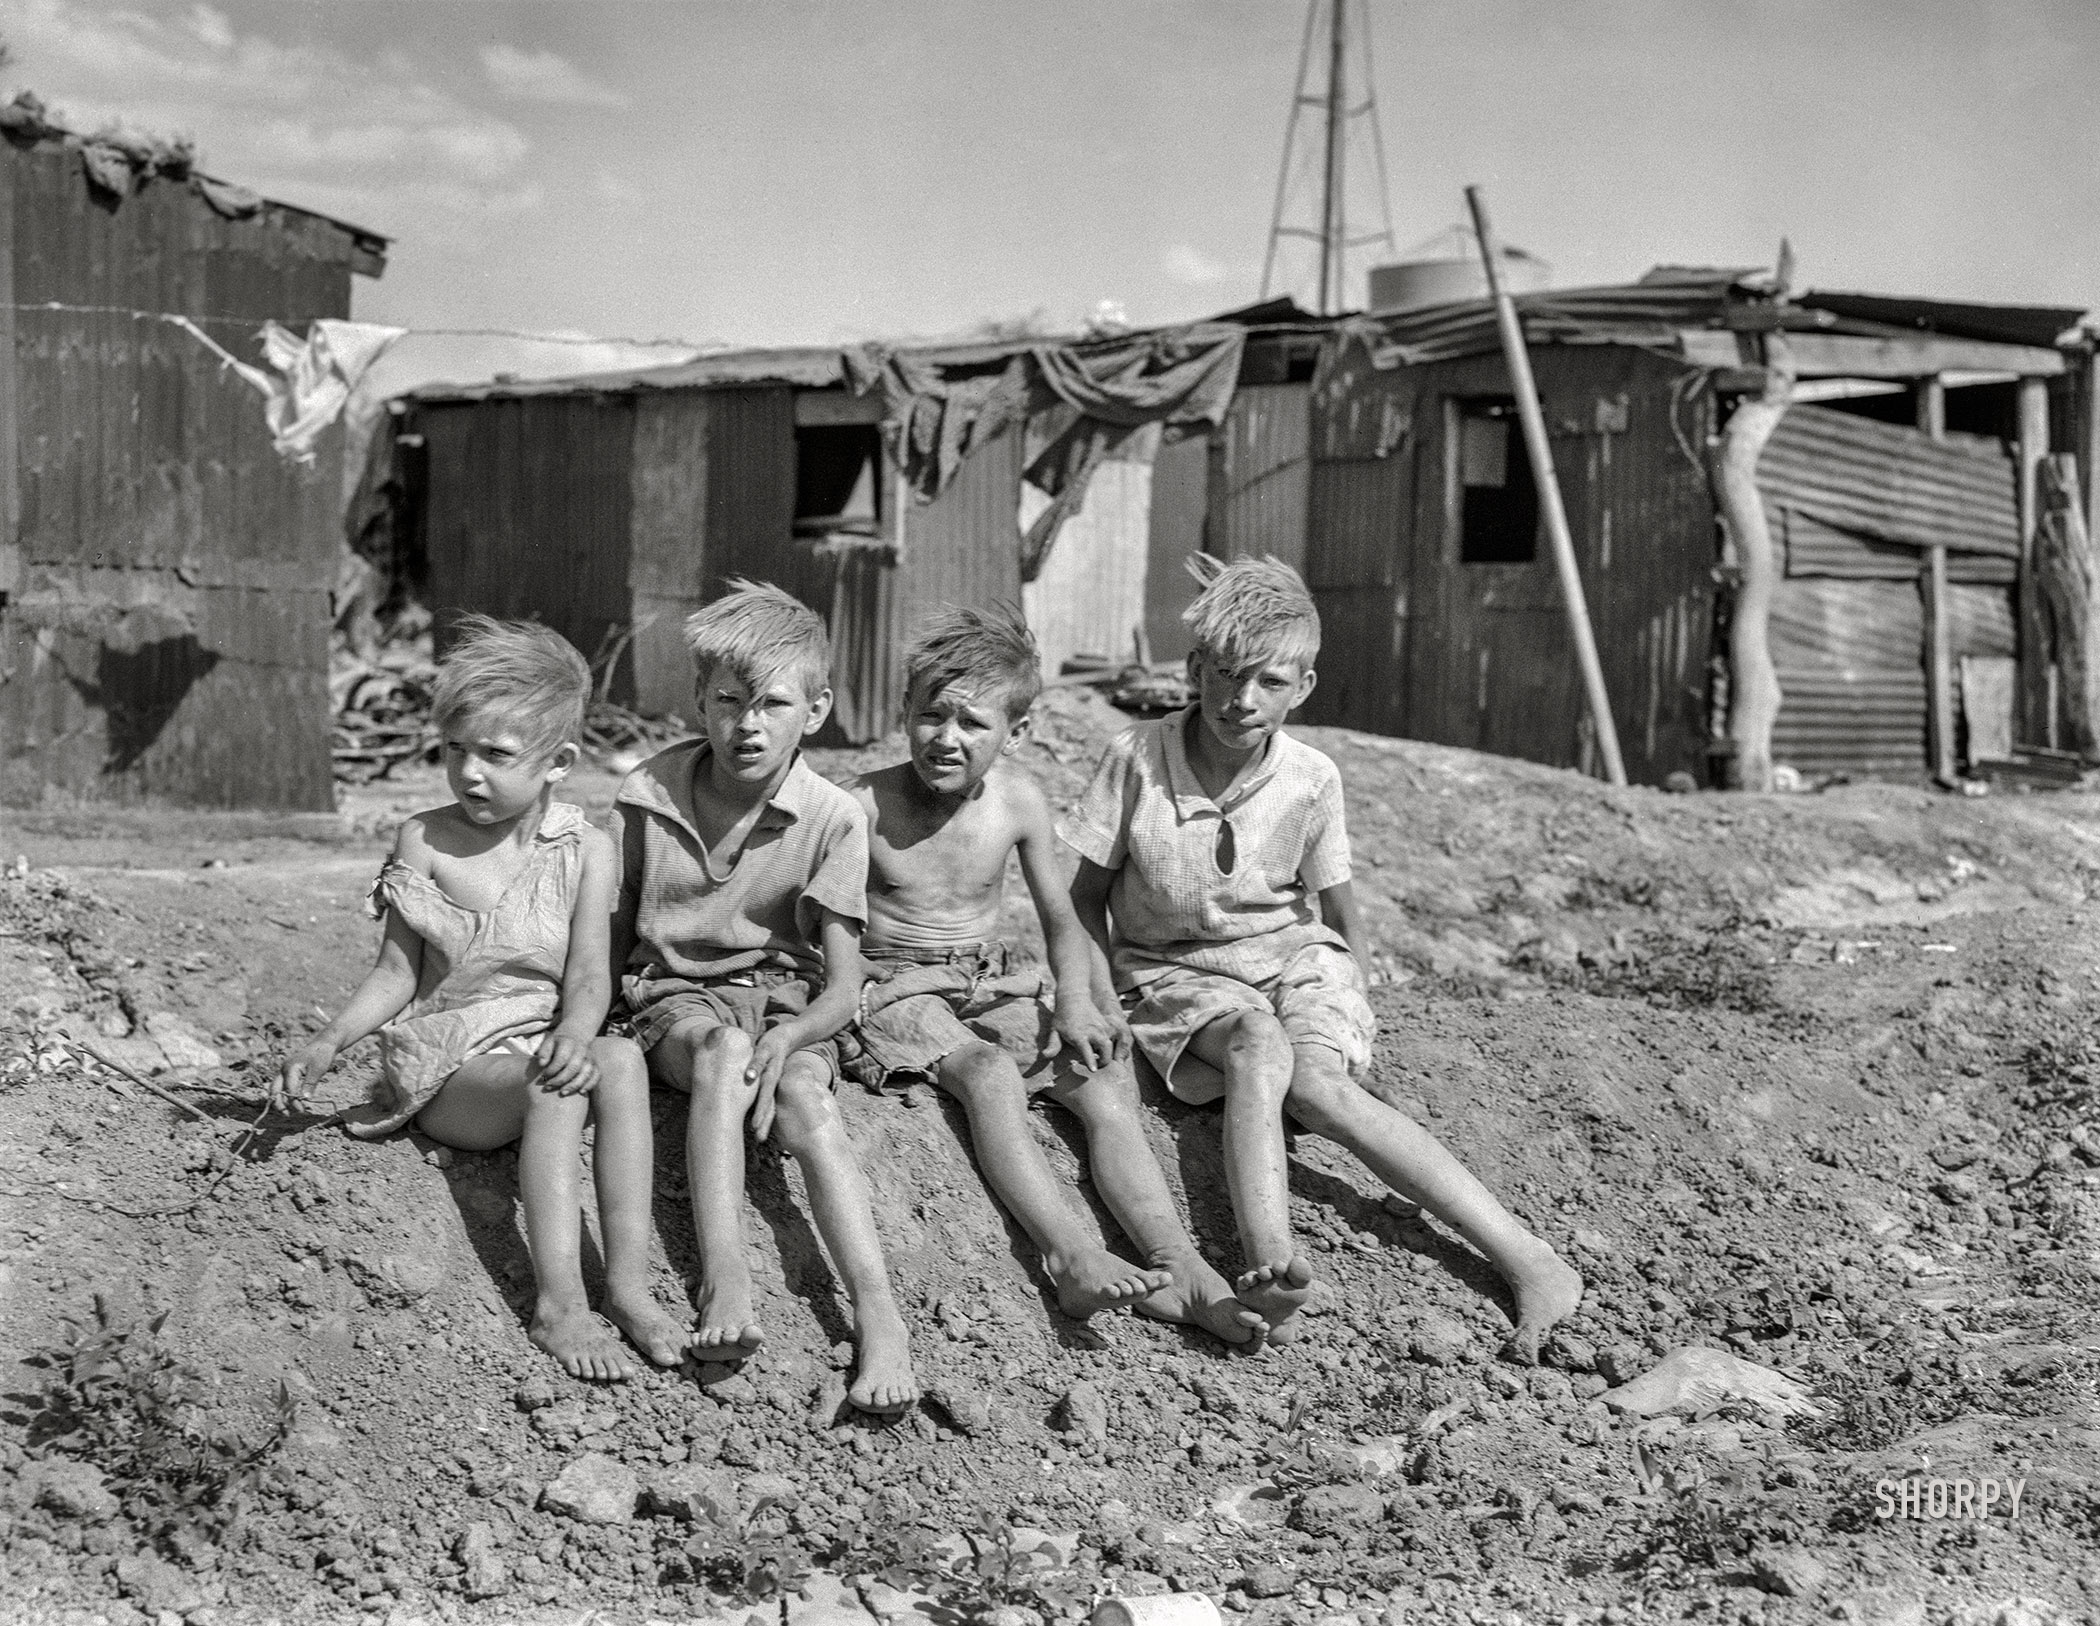 May 1937. "Children of migrant cotton field workers from Sweetwater, Oklahoma. Eight children in the family. Note the housing. Near Casa Grande project, Arizona." Medium format acetate negative by Dorothea Lange for the Farm Security Administration. View full size.